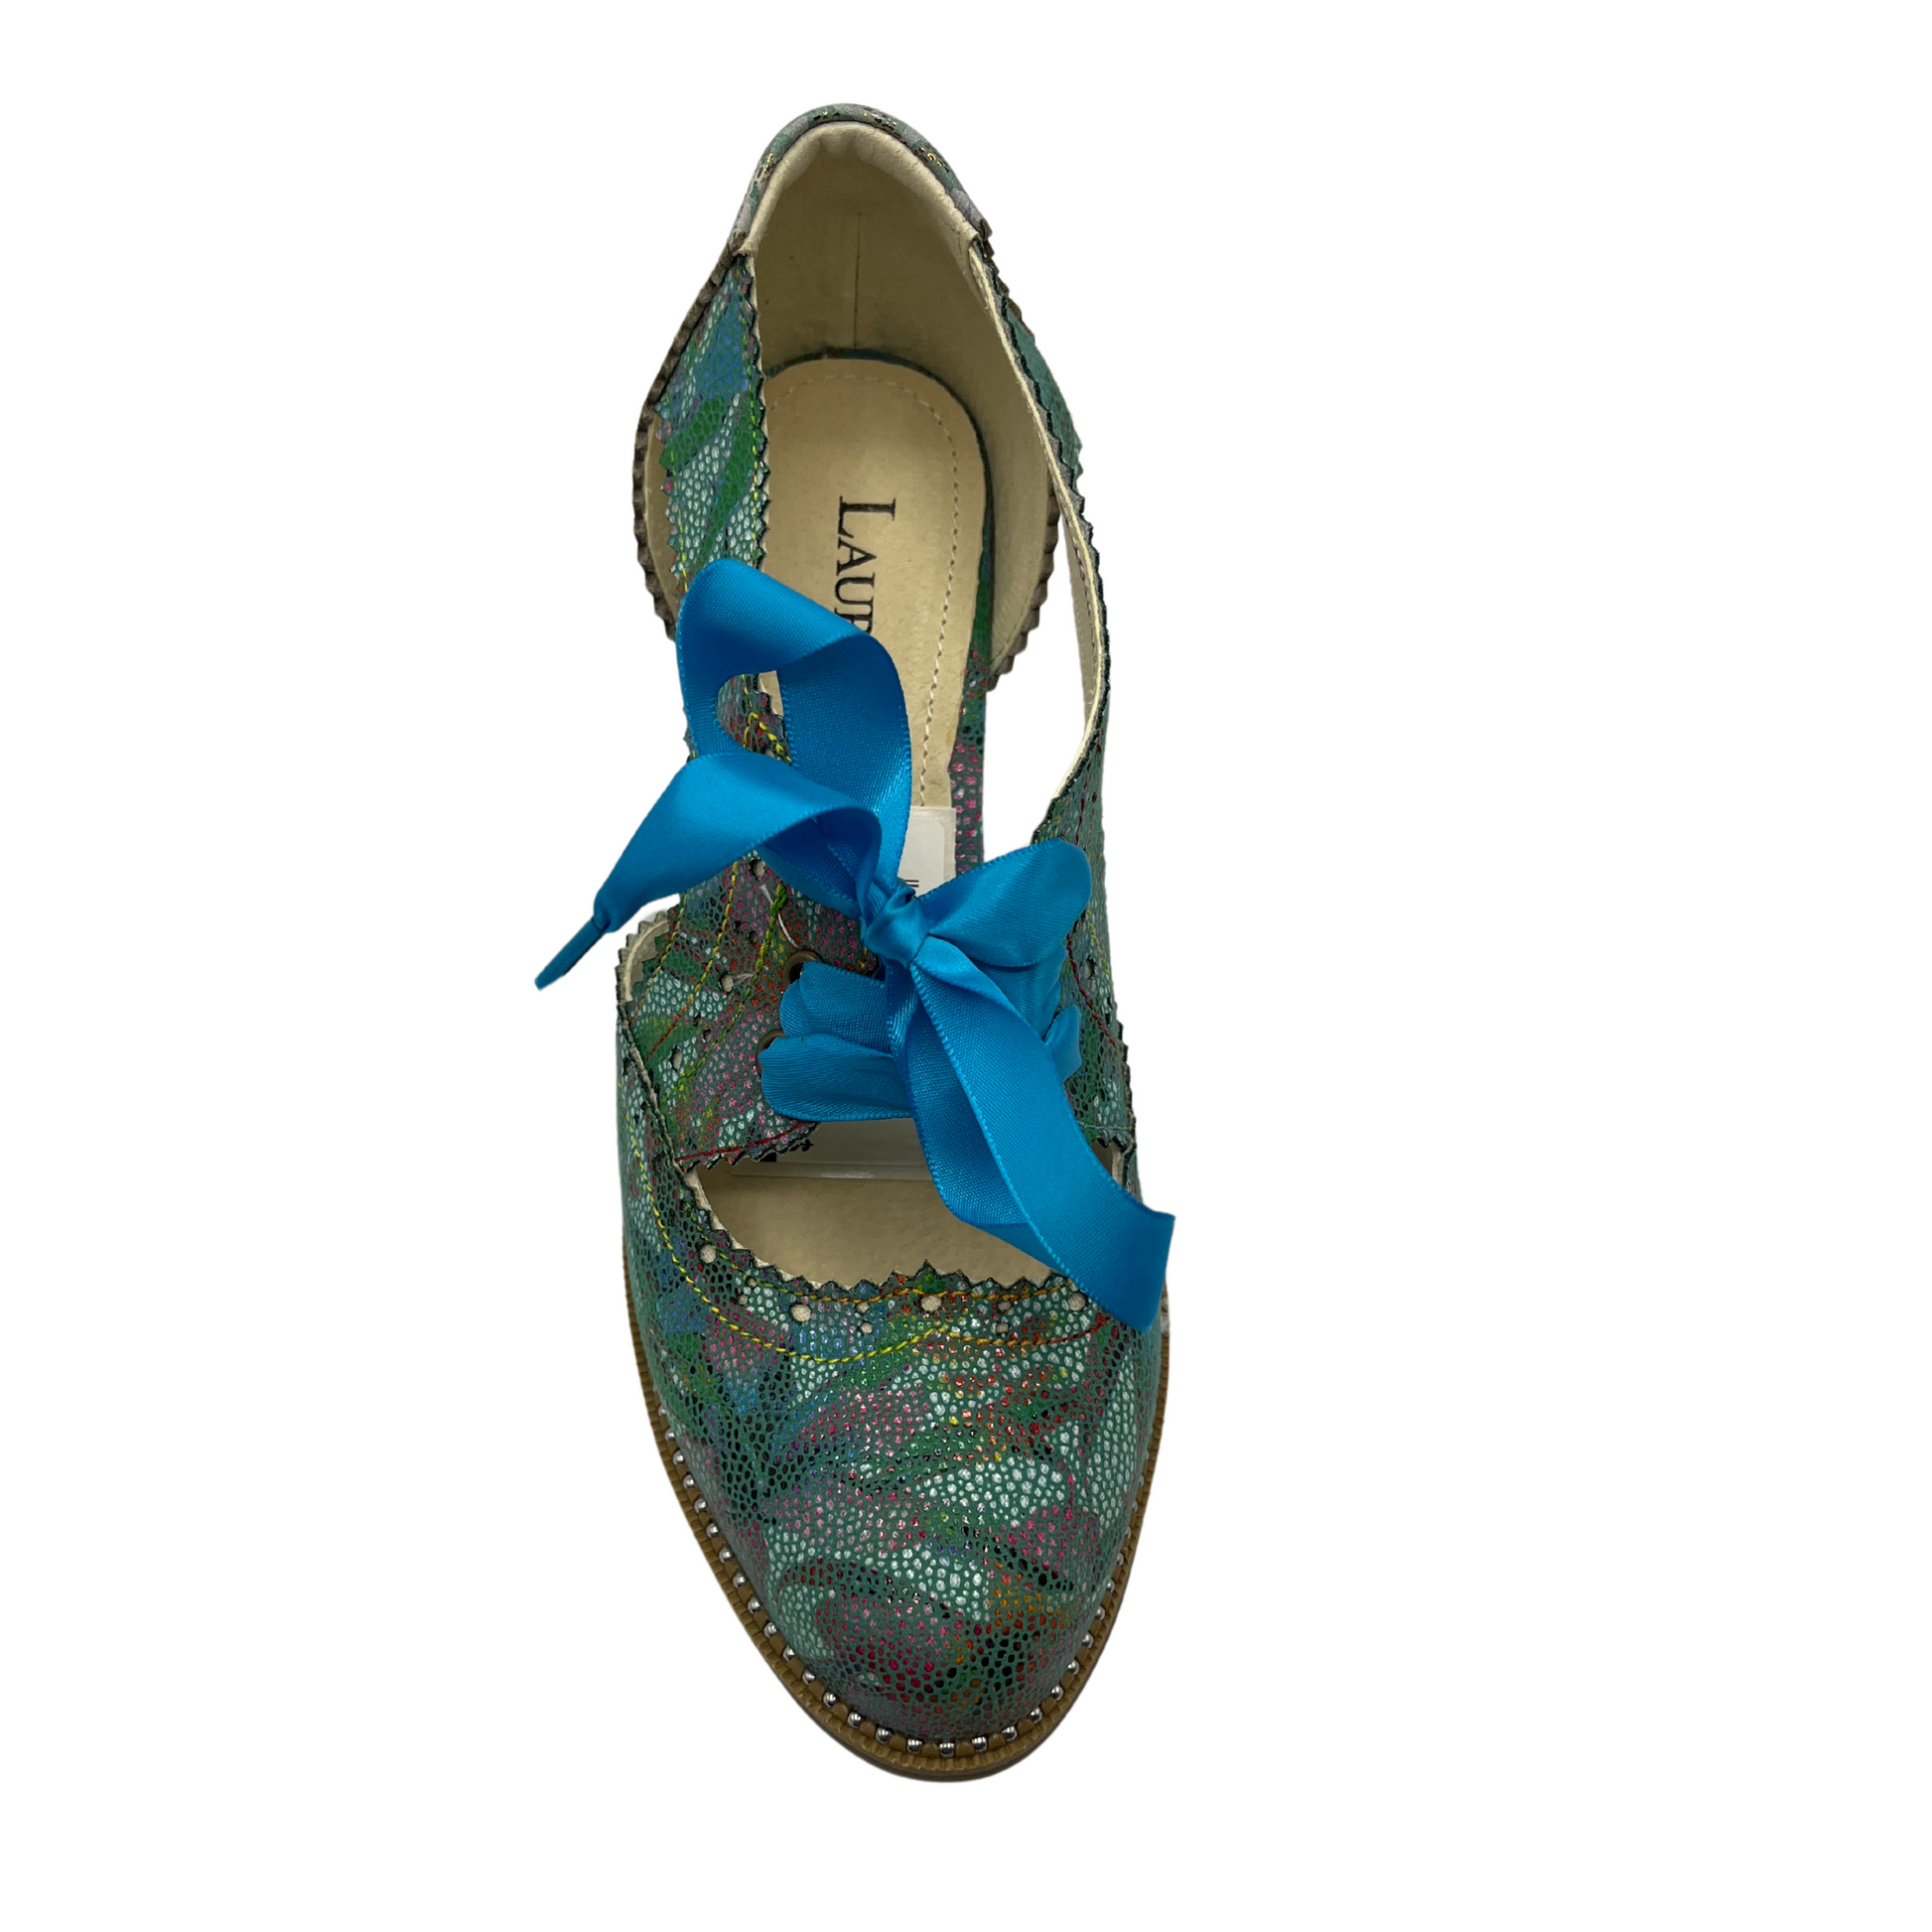 Top view of patterned leather oxford with blue ribbon laces and stacked heel.